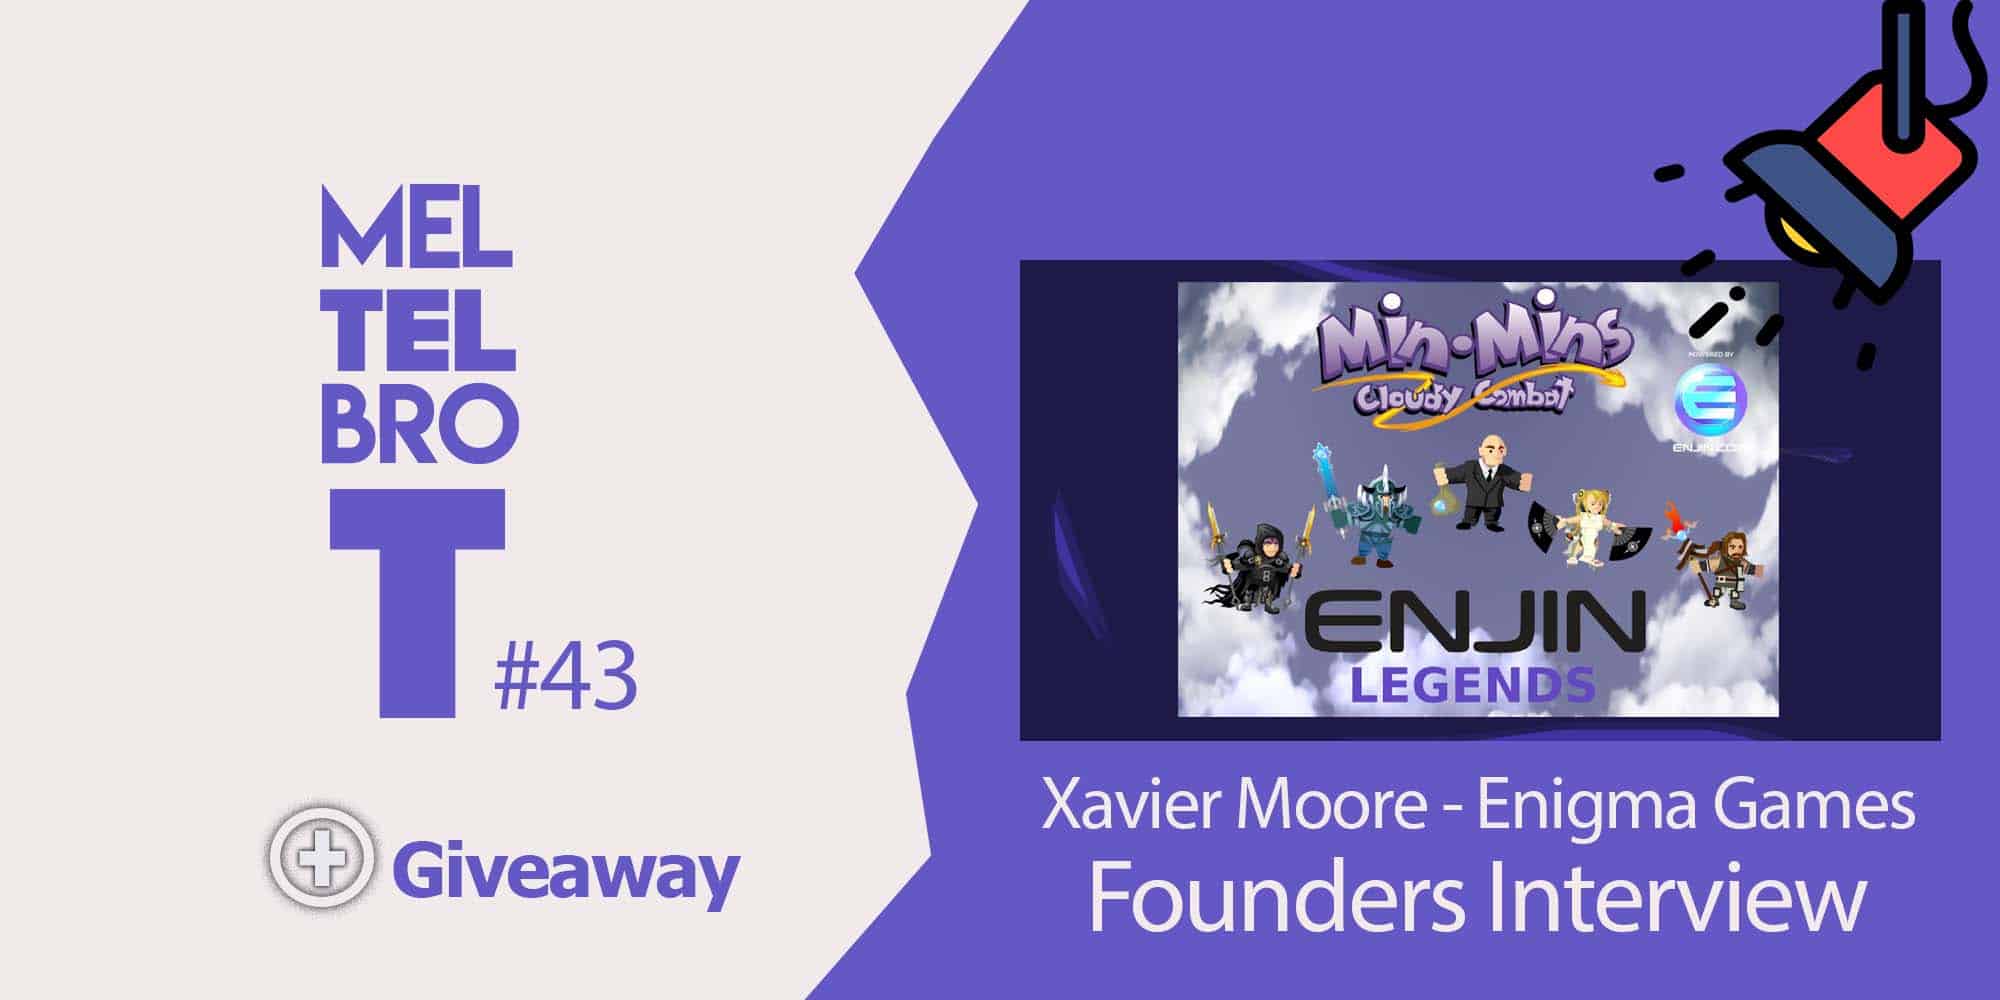 Meltelbrot 43 MinMins Today I’m chatting with Xavier Moore, founder of Enigma Games, who are developing Shield of Shalwend and Min Mins, both powered by the Enjin Gaming Blockchain Solution. For this interview we focus on Min Mins – a turn based strategy game where armies of five compete for dominance in a battlefield of clouds. It has been likened to a ‘battleship’ style of gameplay. But first as always, the usual giveaway!